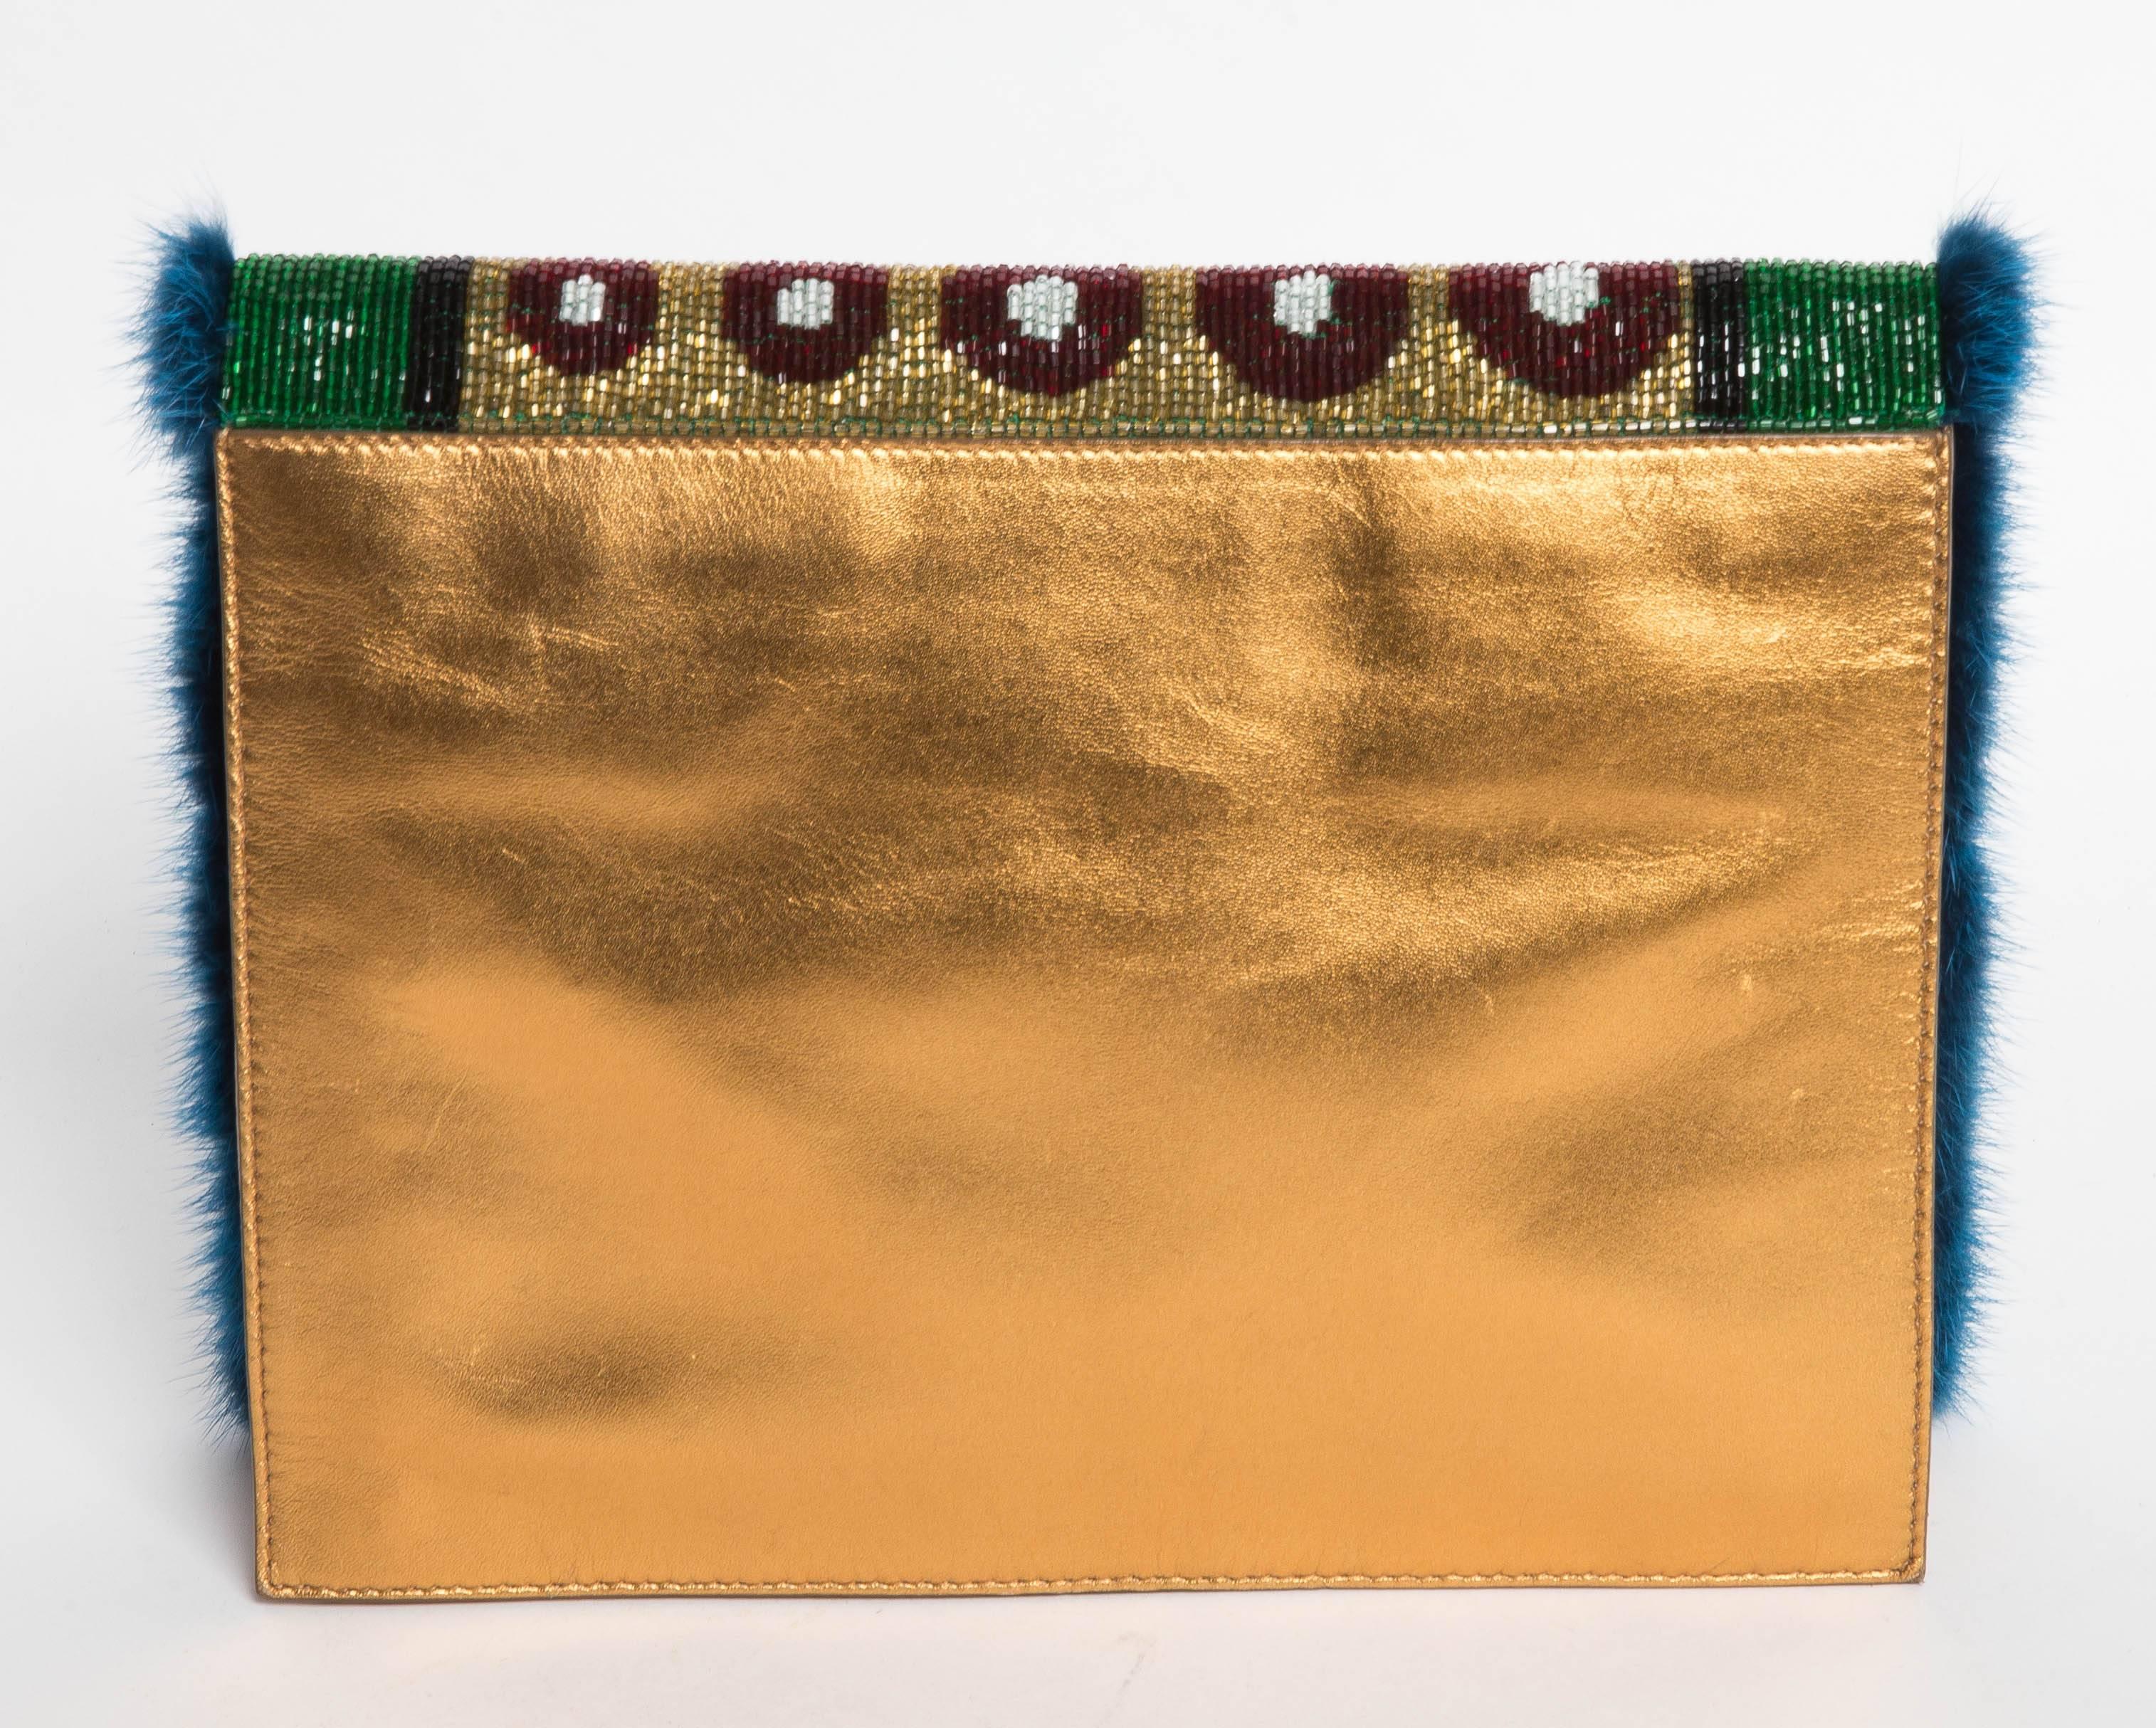 Beaded Fendi Shoulder Bag in Gold Leather with luxe Teal Blue Mink Trim. 
Garnet, White, Gold, Emerald and Black Beads Adorn the Front Flap of this Stunning Bag.The Interior of the bag is lined in Gold Satin with one Zip Pocket while the inner flap